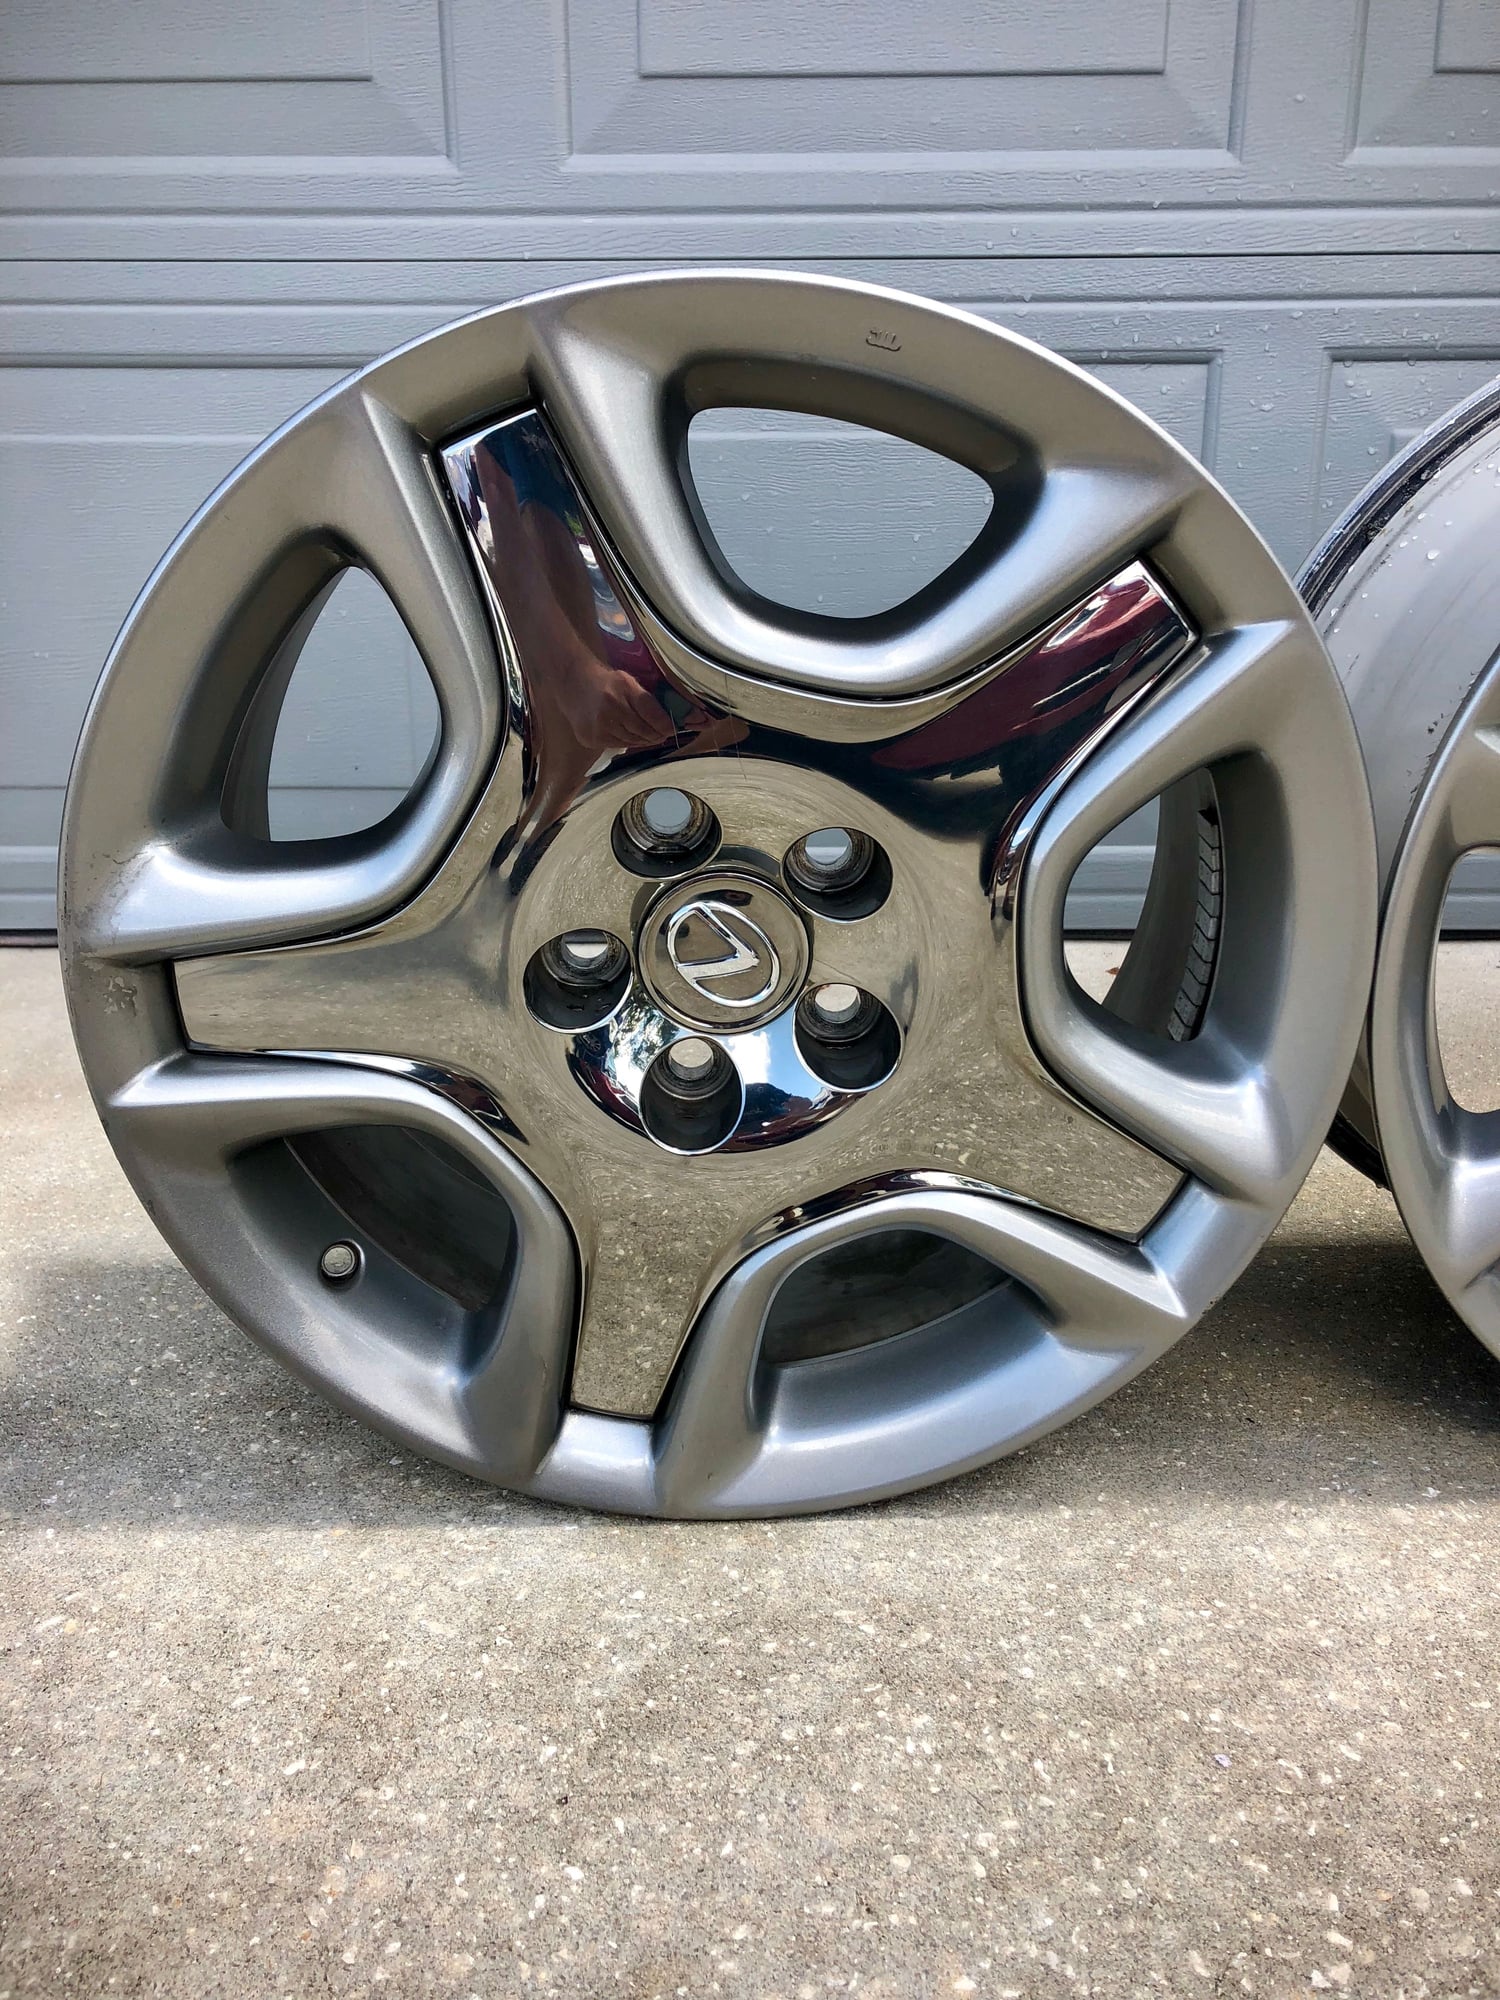 Wheels and Tires/Axles - 2007 SC430 OEM Wheels 29k Miles - Used - 2002 to 2010 Lexus SC430 - Rockledge, FL 32955, United States